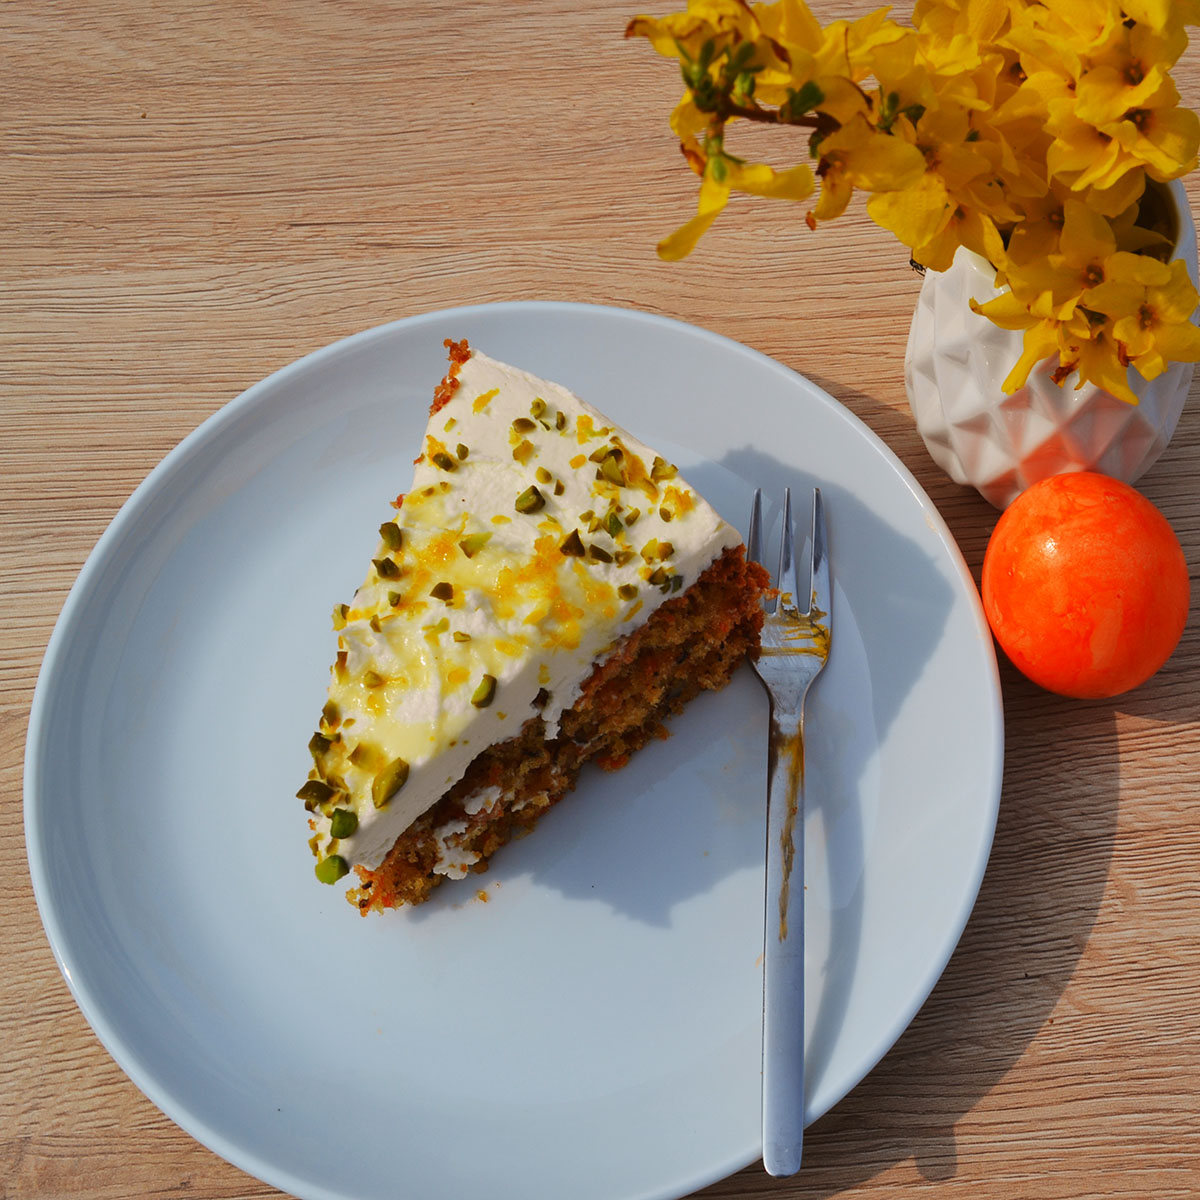 Carrot spice cake (according to Ottolenghi)